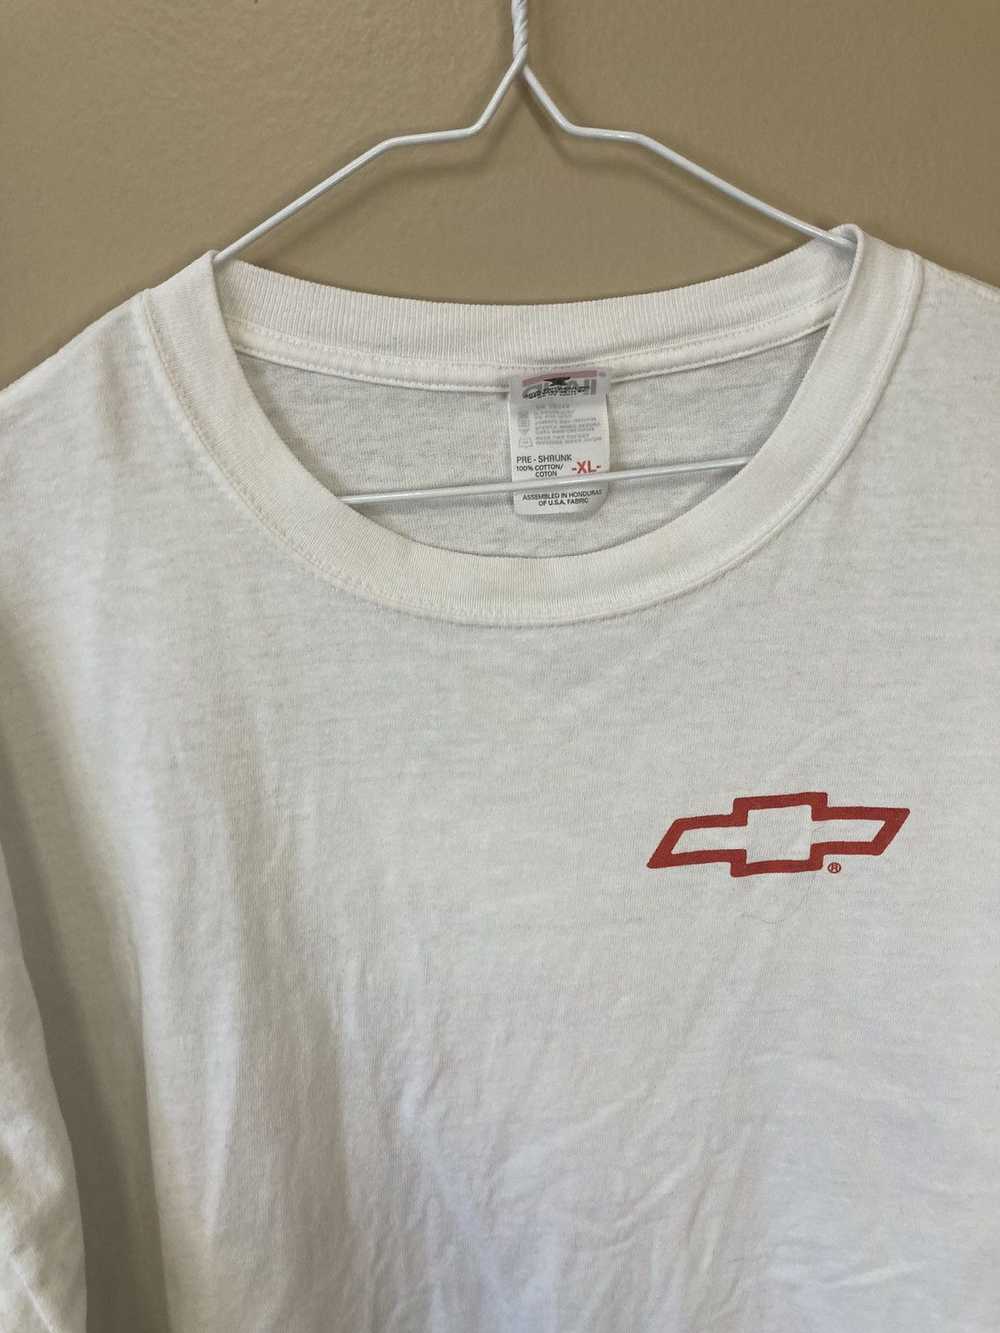 Vintage Anvil Henry Who Chevy Racing T-Shirt - image 3